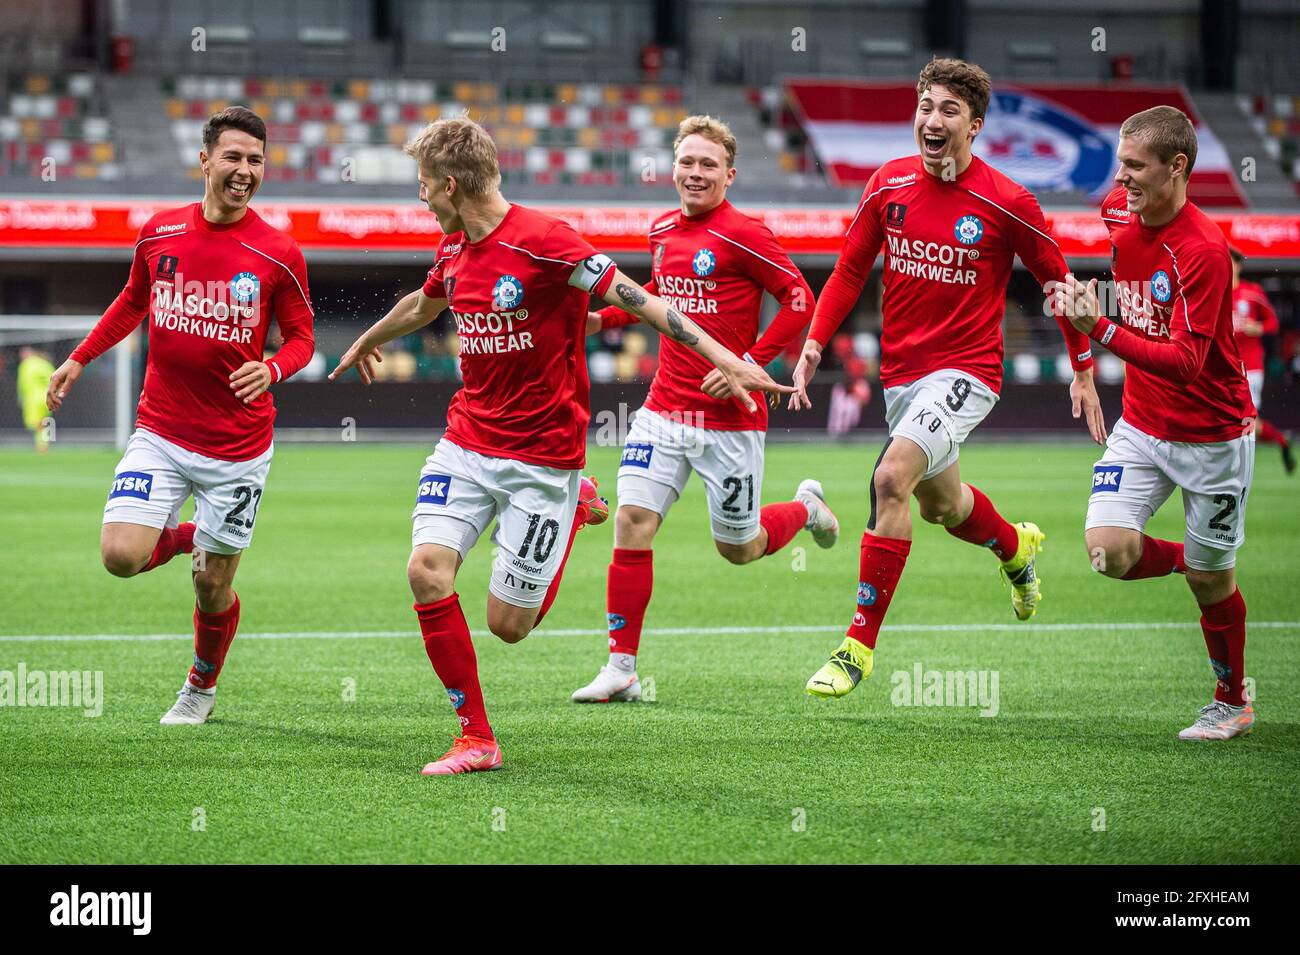 Silkeborg, Denmark. 26th May, 2021. Magnus Mattsson (10) of Silkeborg IF  scores for 1-0 and celebrates with the team mates during the NordicBet Liga  match between Silkeborg IF and FC Fredericia at